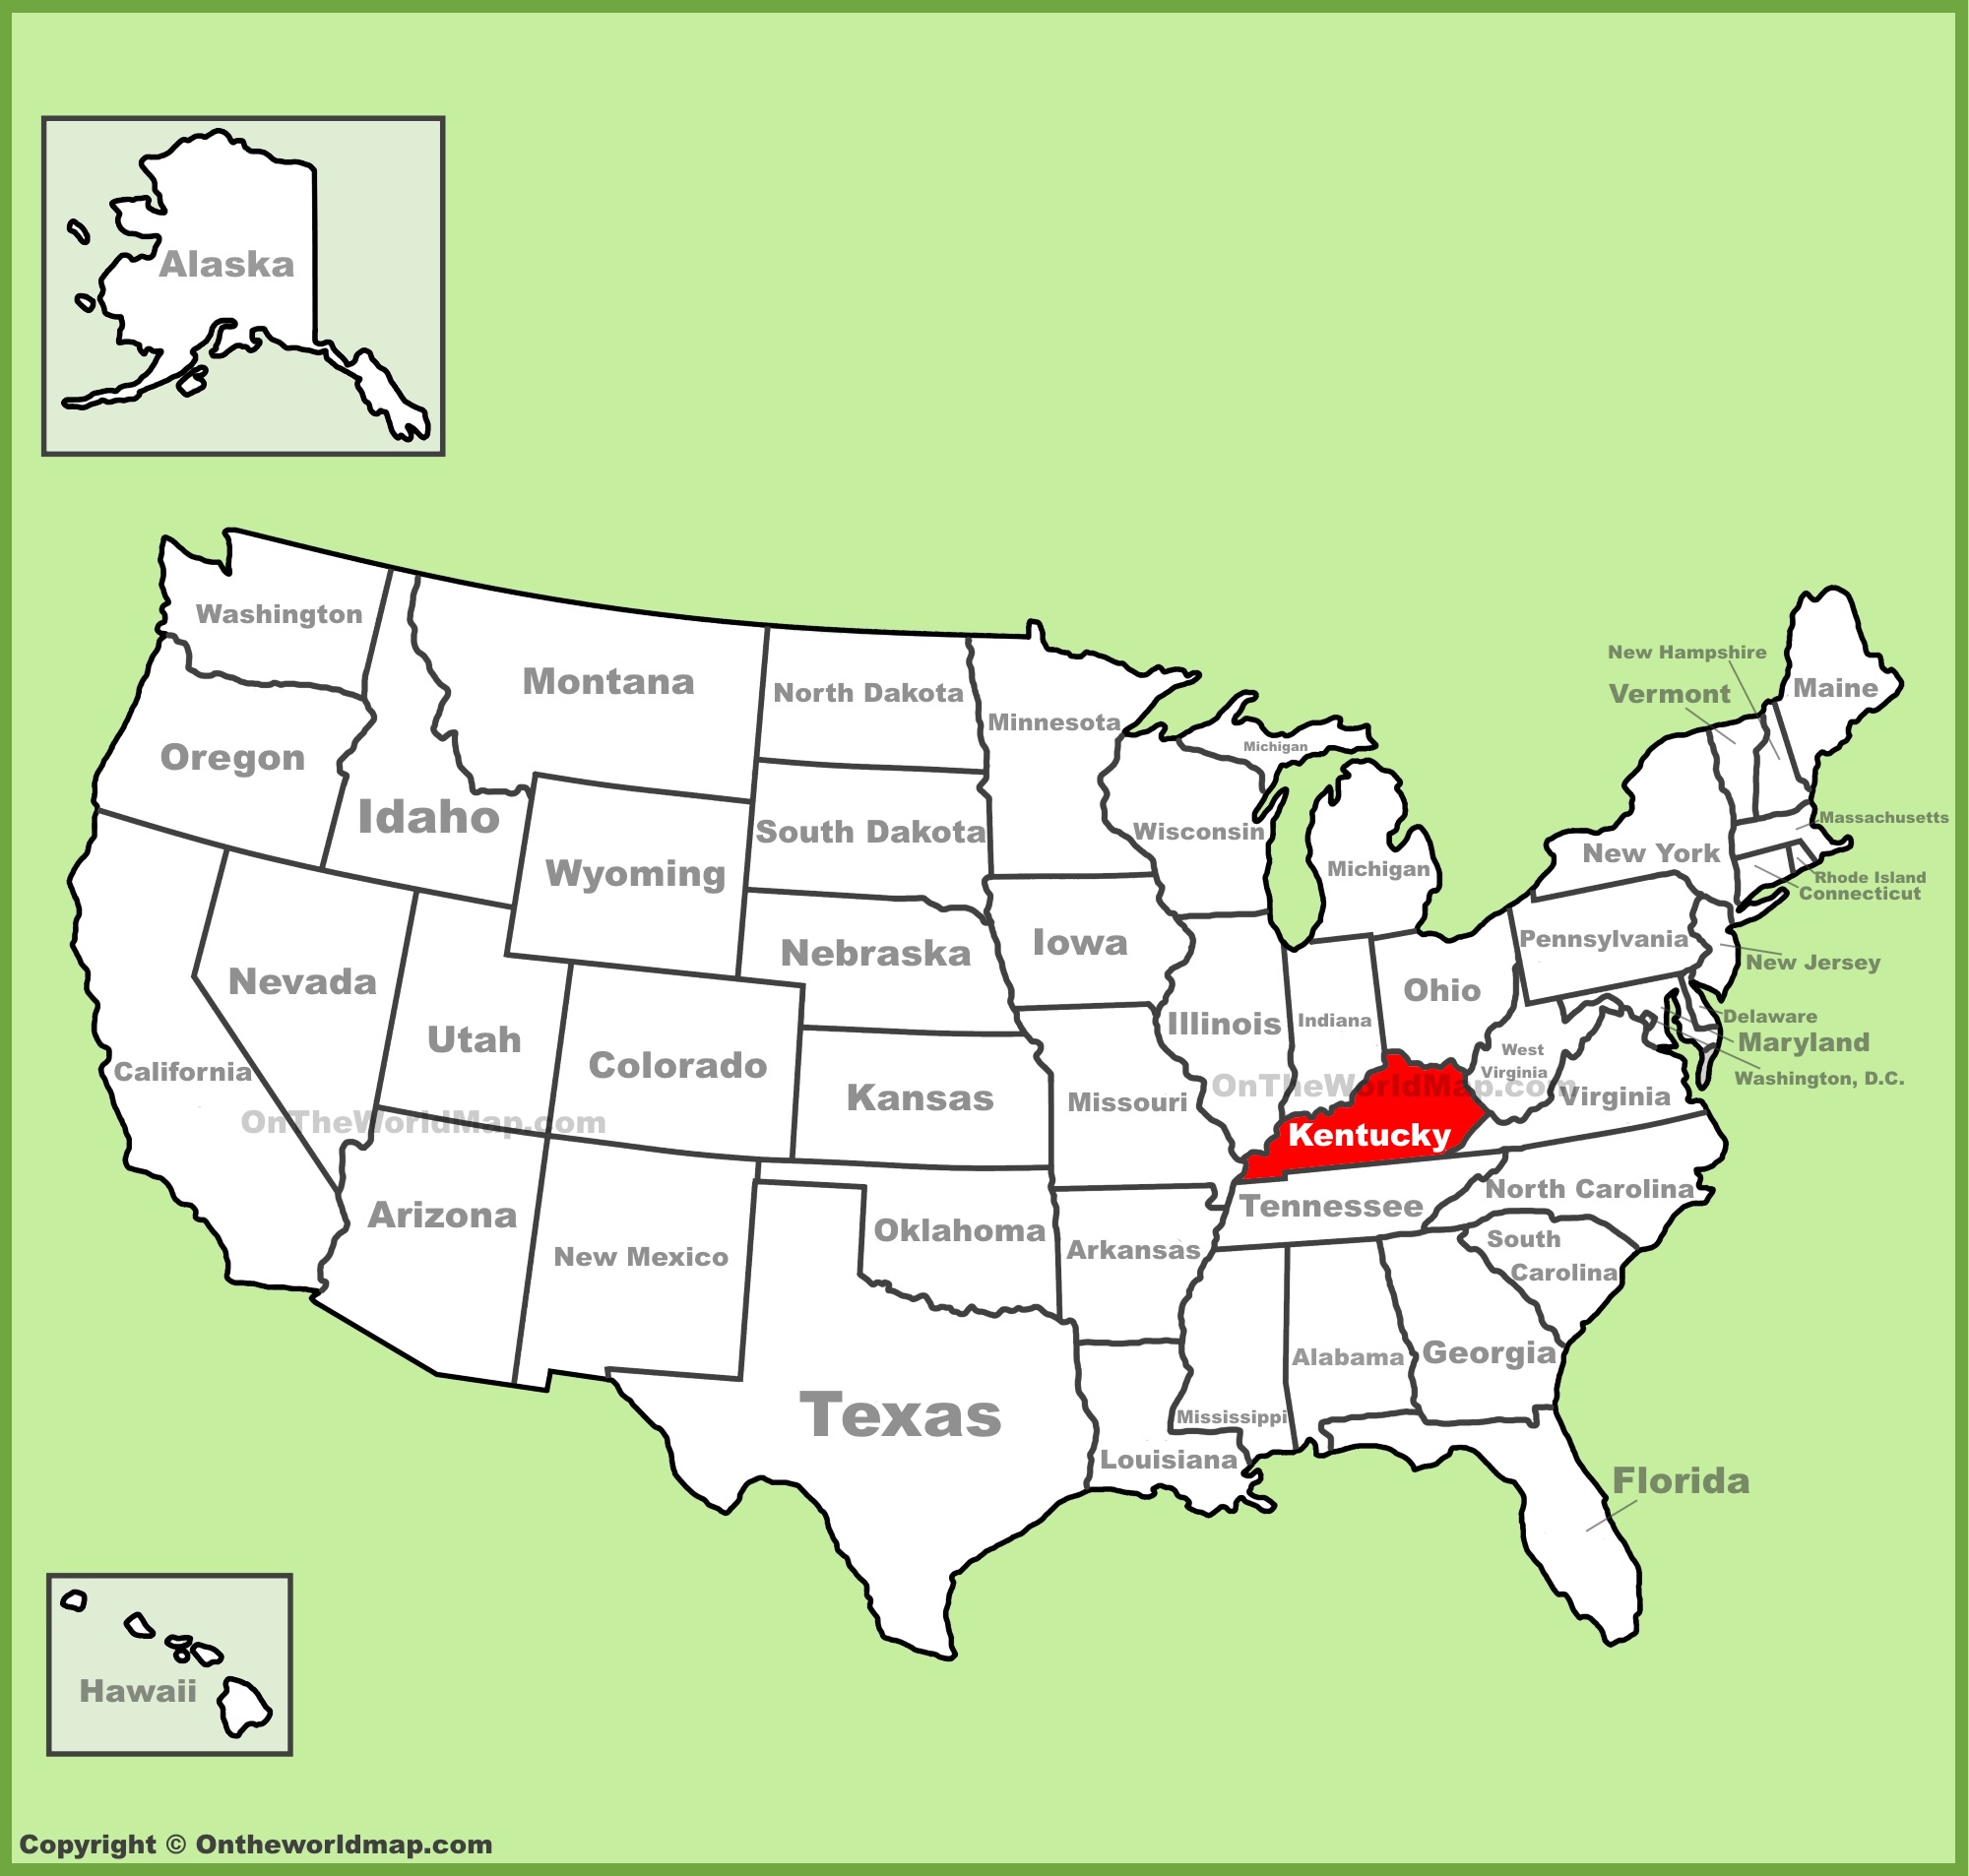 Kentucky Location On The Us Map 